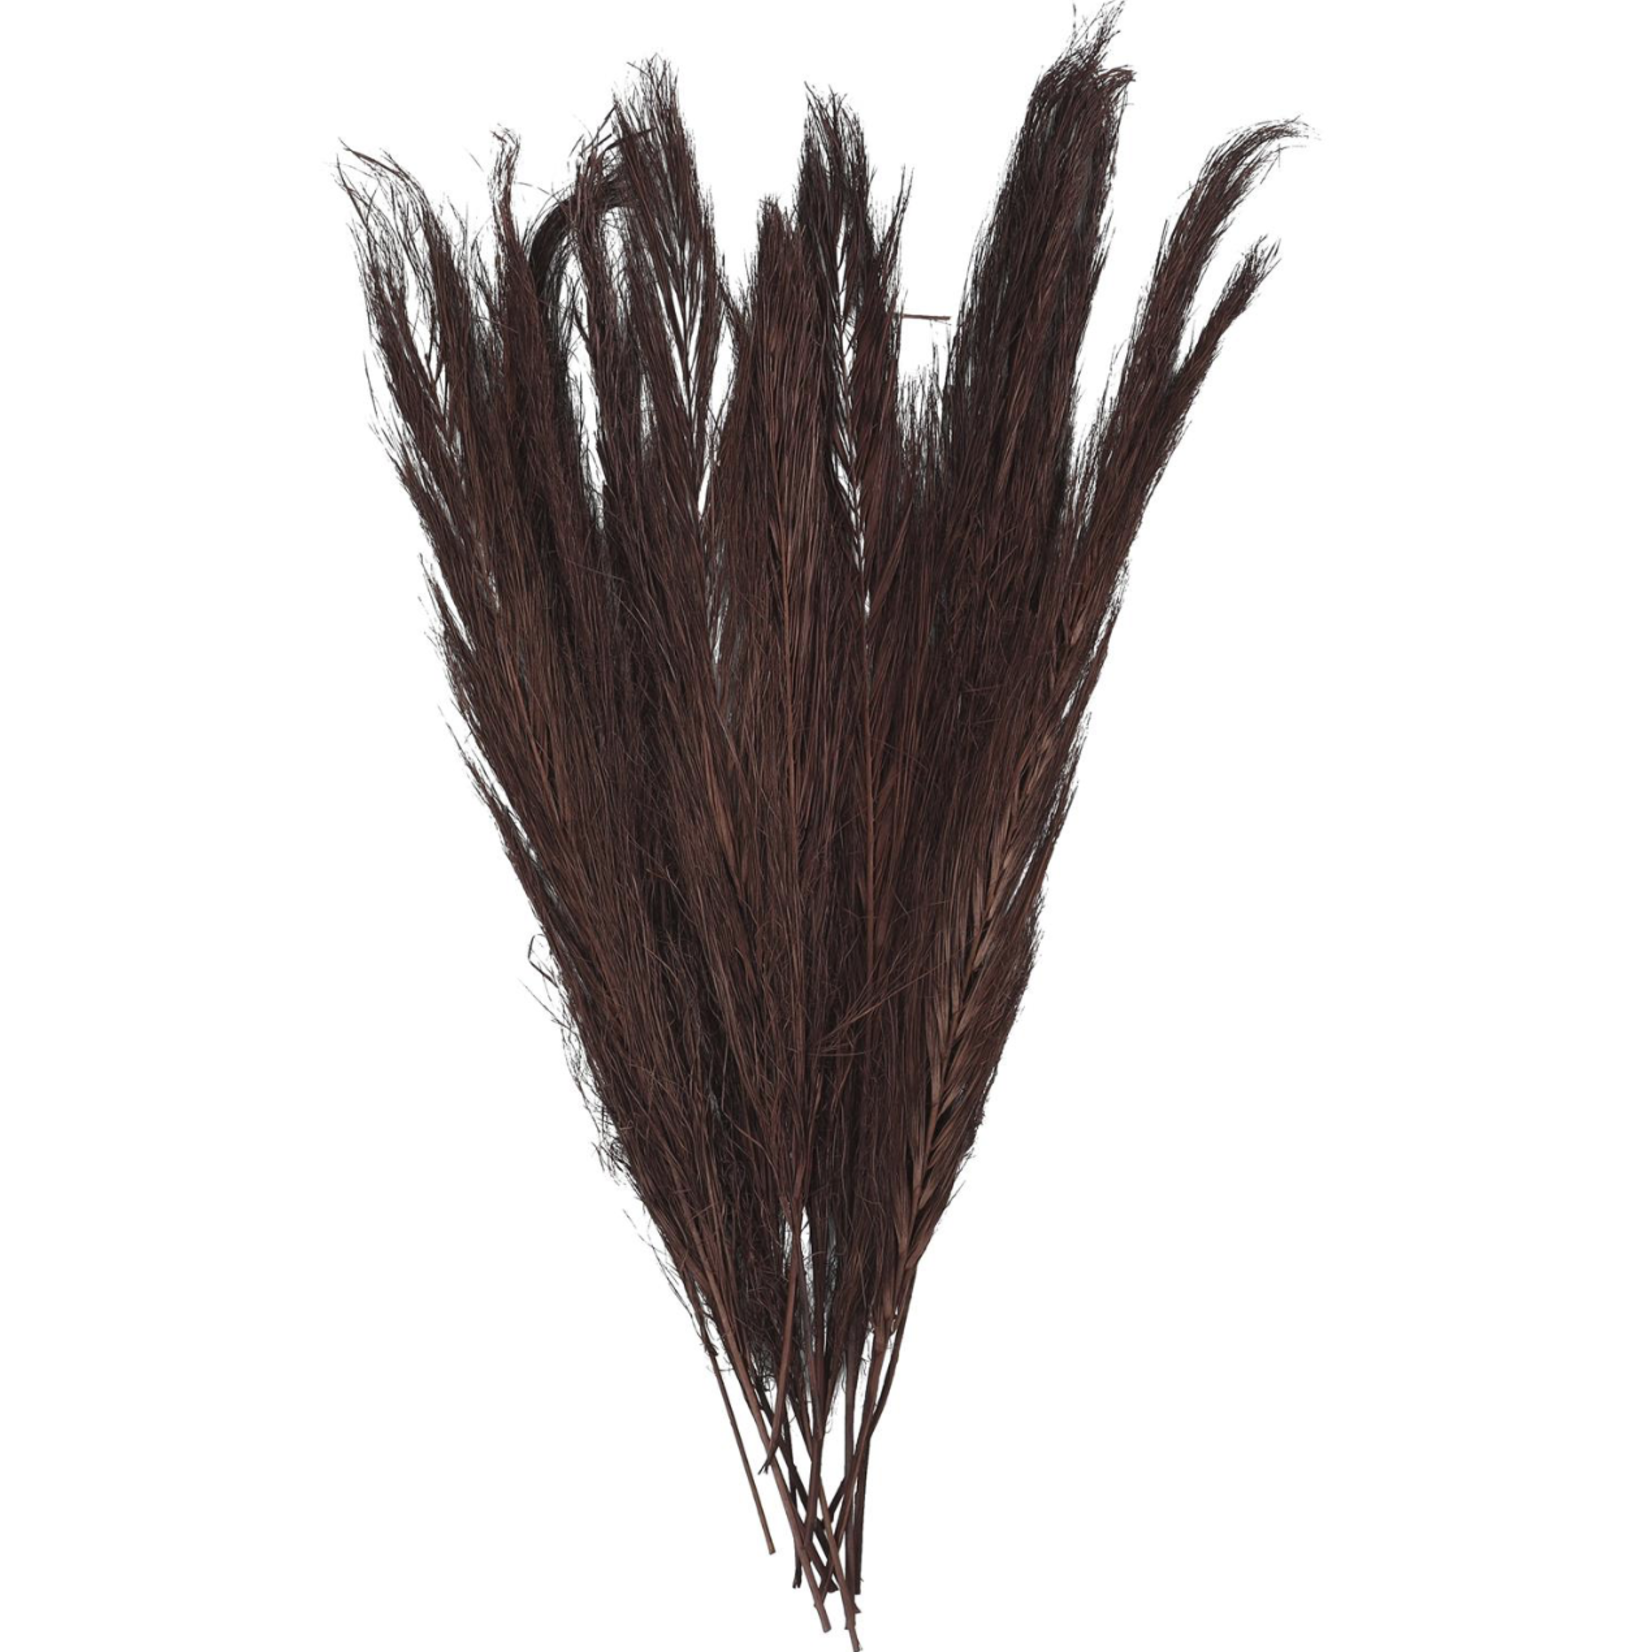 35”H X 4” BROWN DRIED PLANT PAMPAS GRASS TALL PACK  NATURAL FOLIAGE